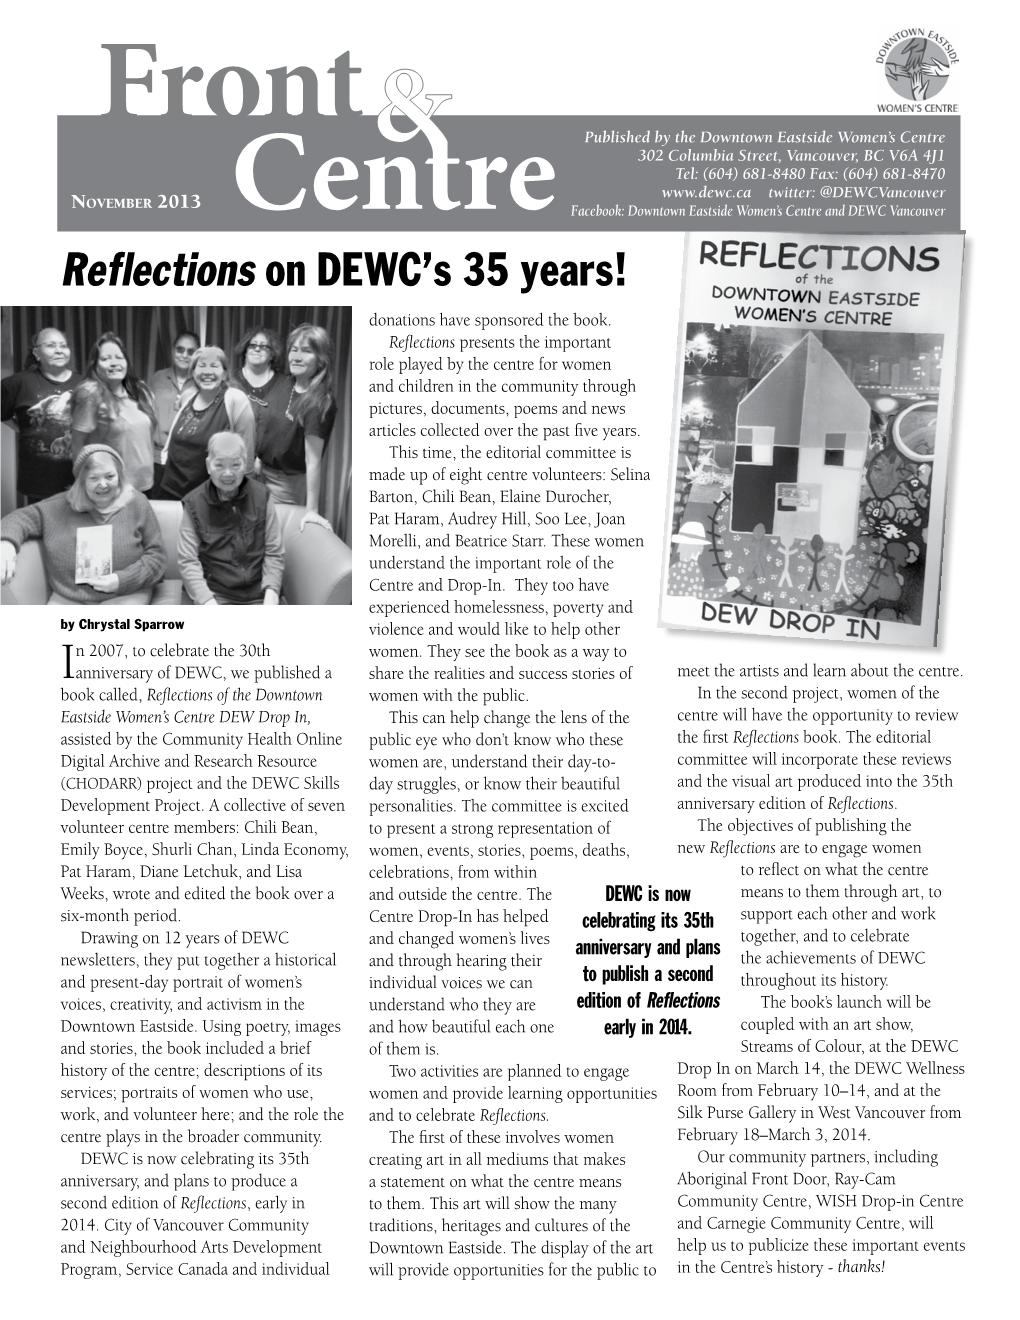 Reflections on Dewc's 35 Years!